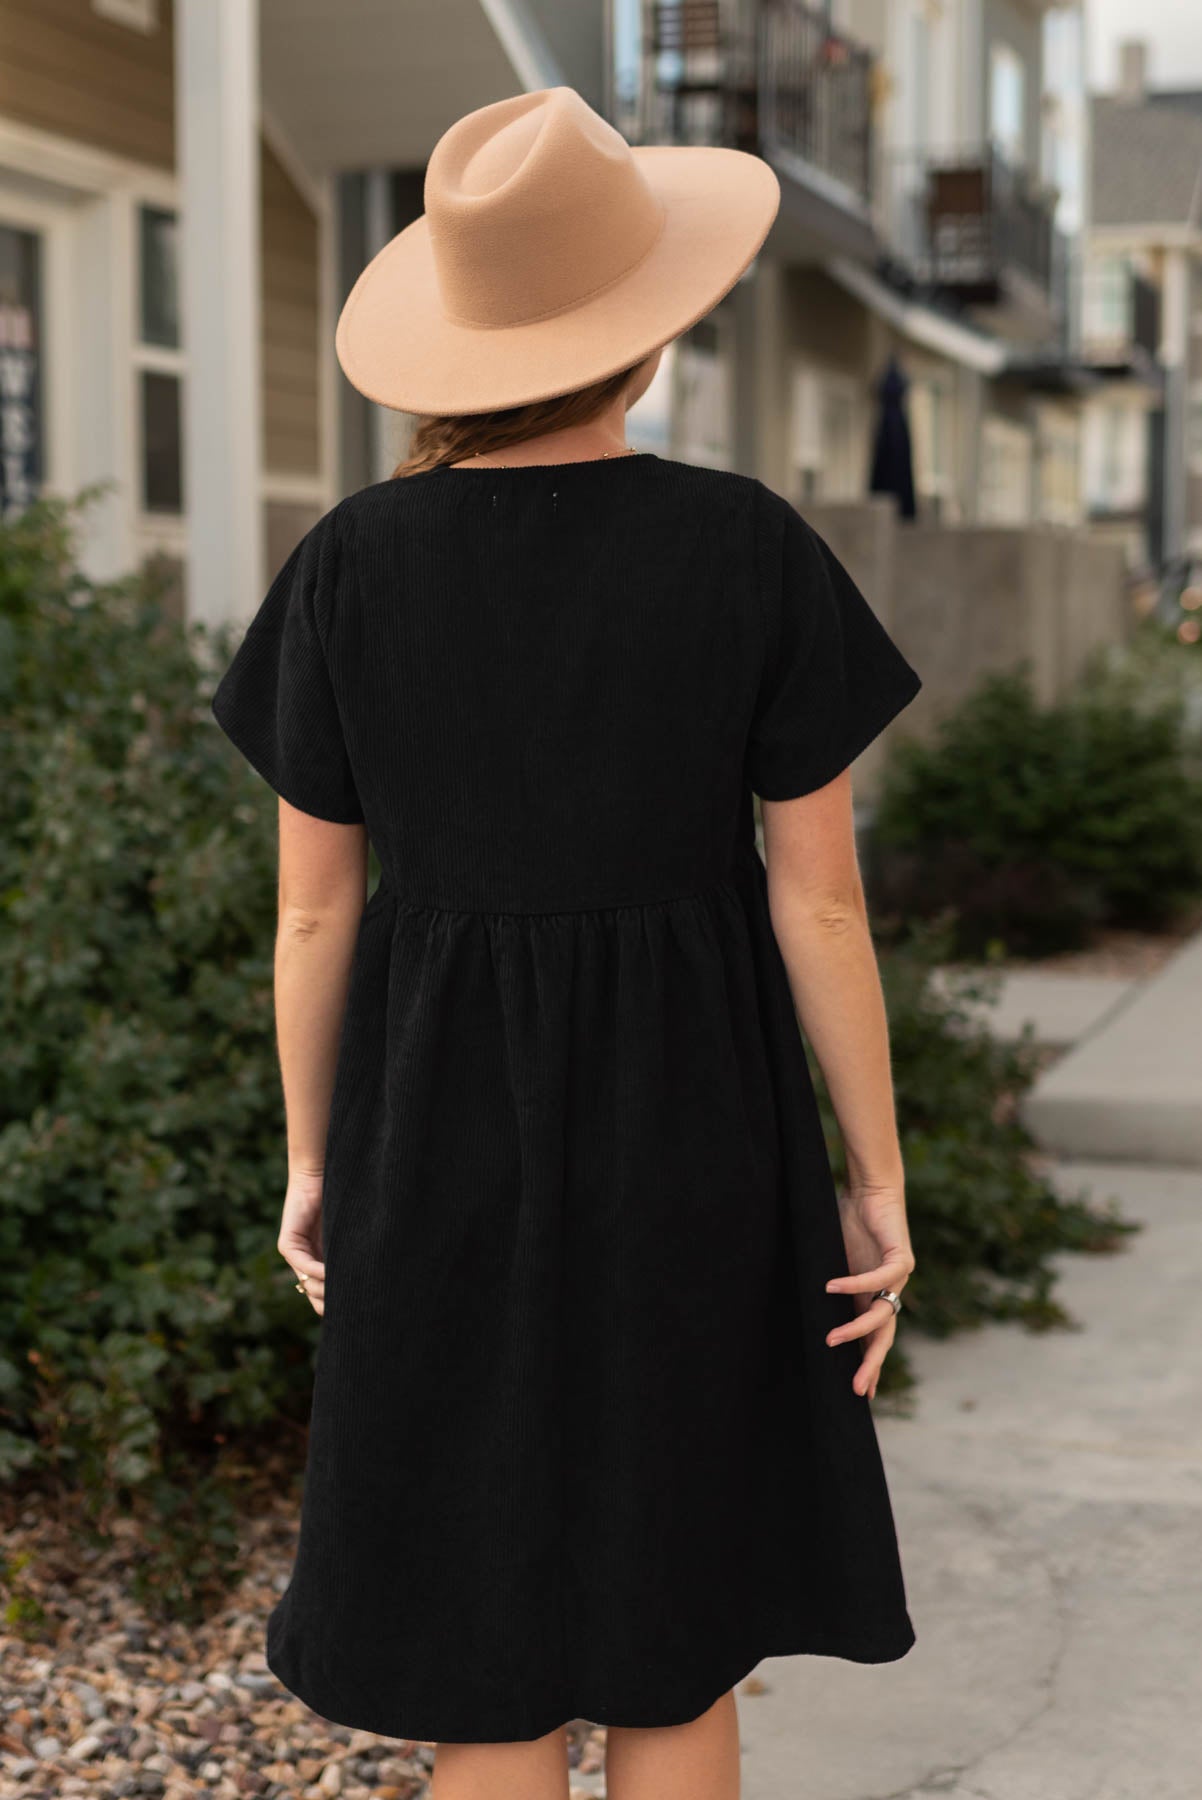 Back view of a black corduroy button up dress